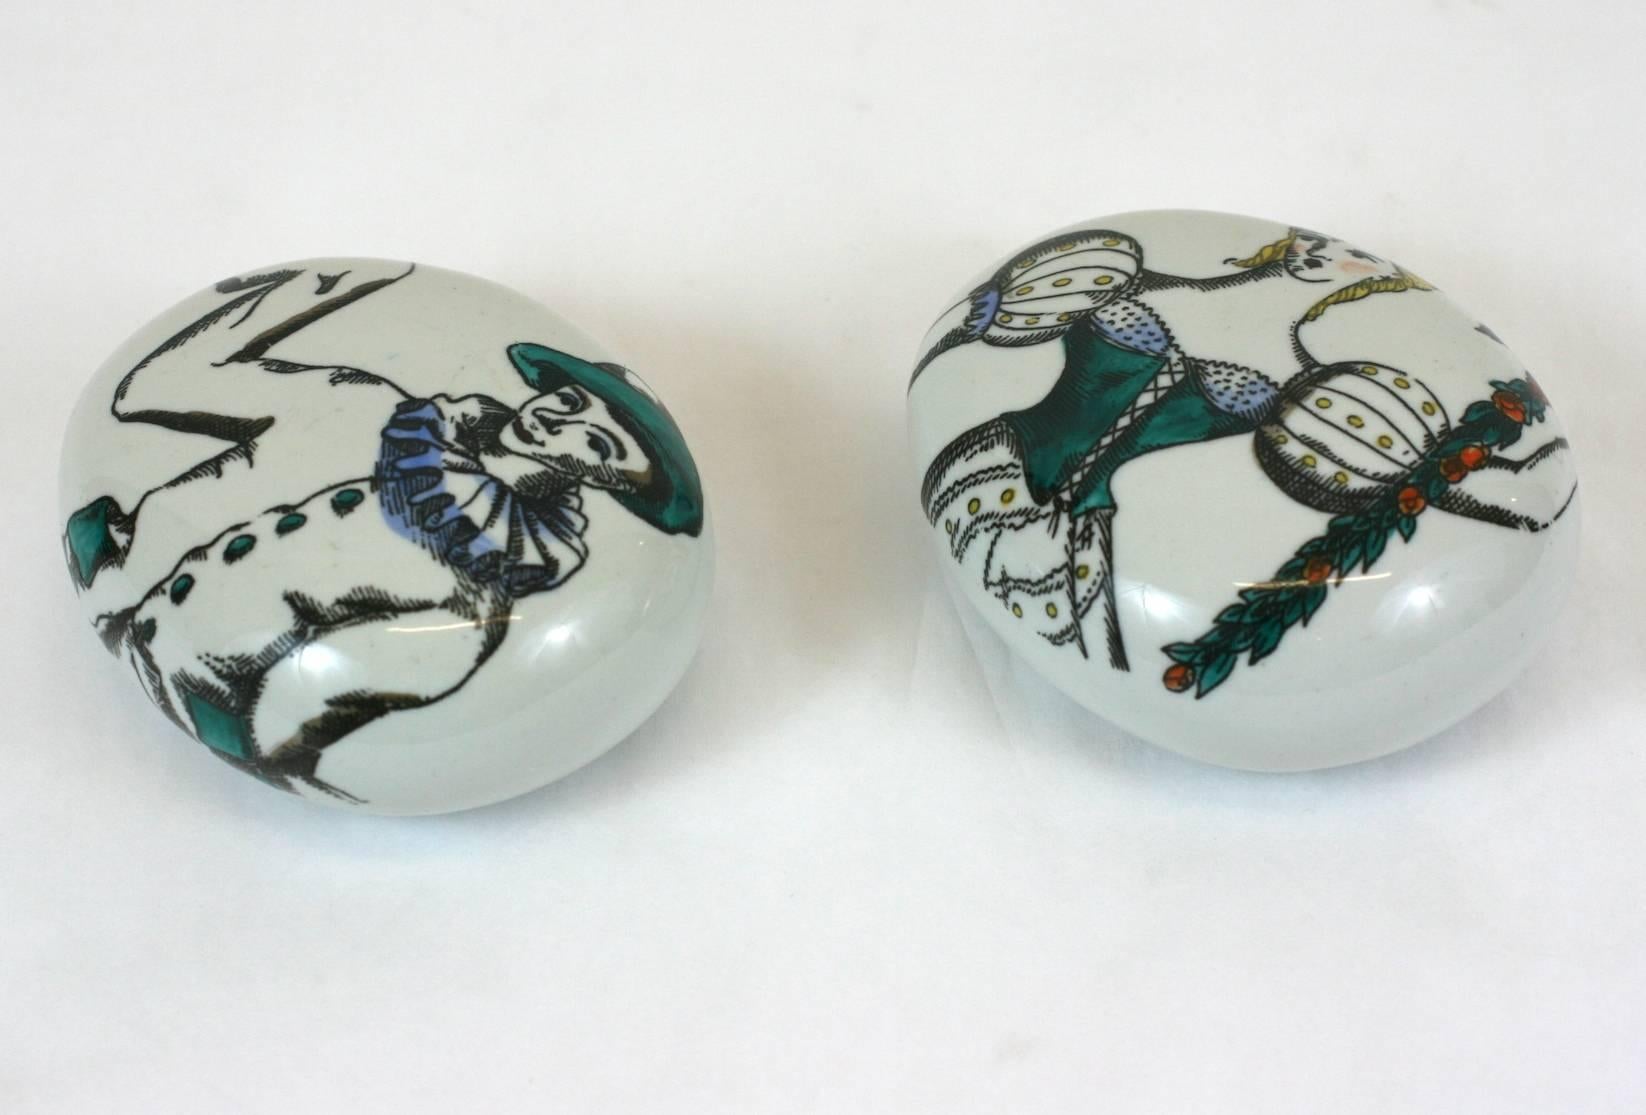 Pair of porcelain Fornasetti pebble paperweights. 

Motifs: Commedia dell'Arte by Piero Fornasetti

Measures: 4